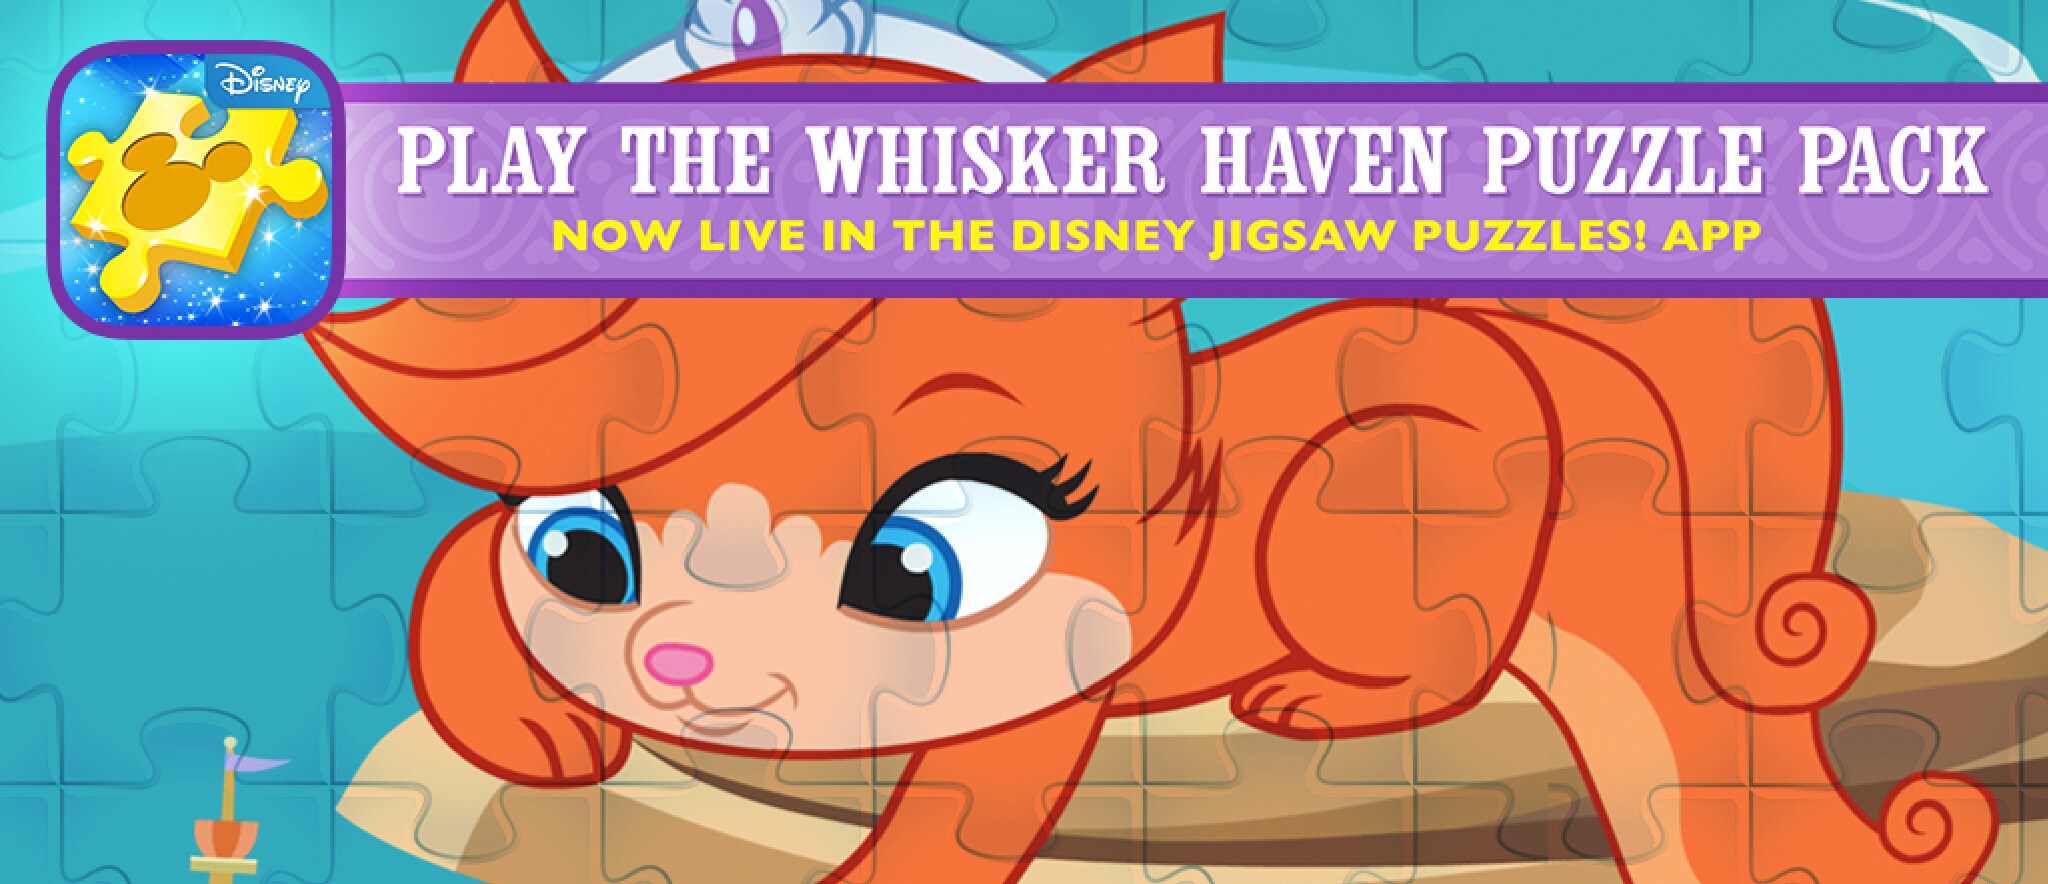 Play the Whisker Haven Puzzle Pack